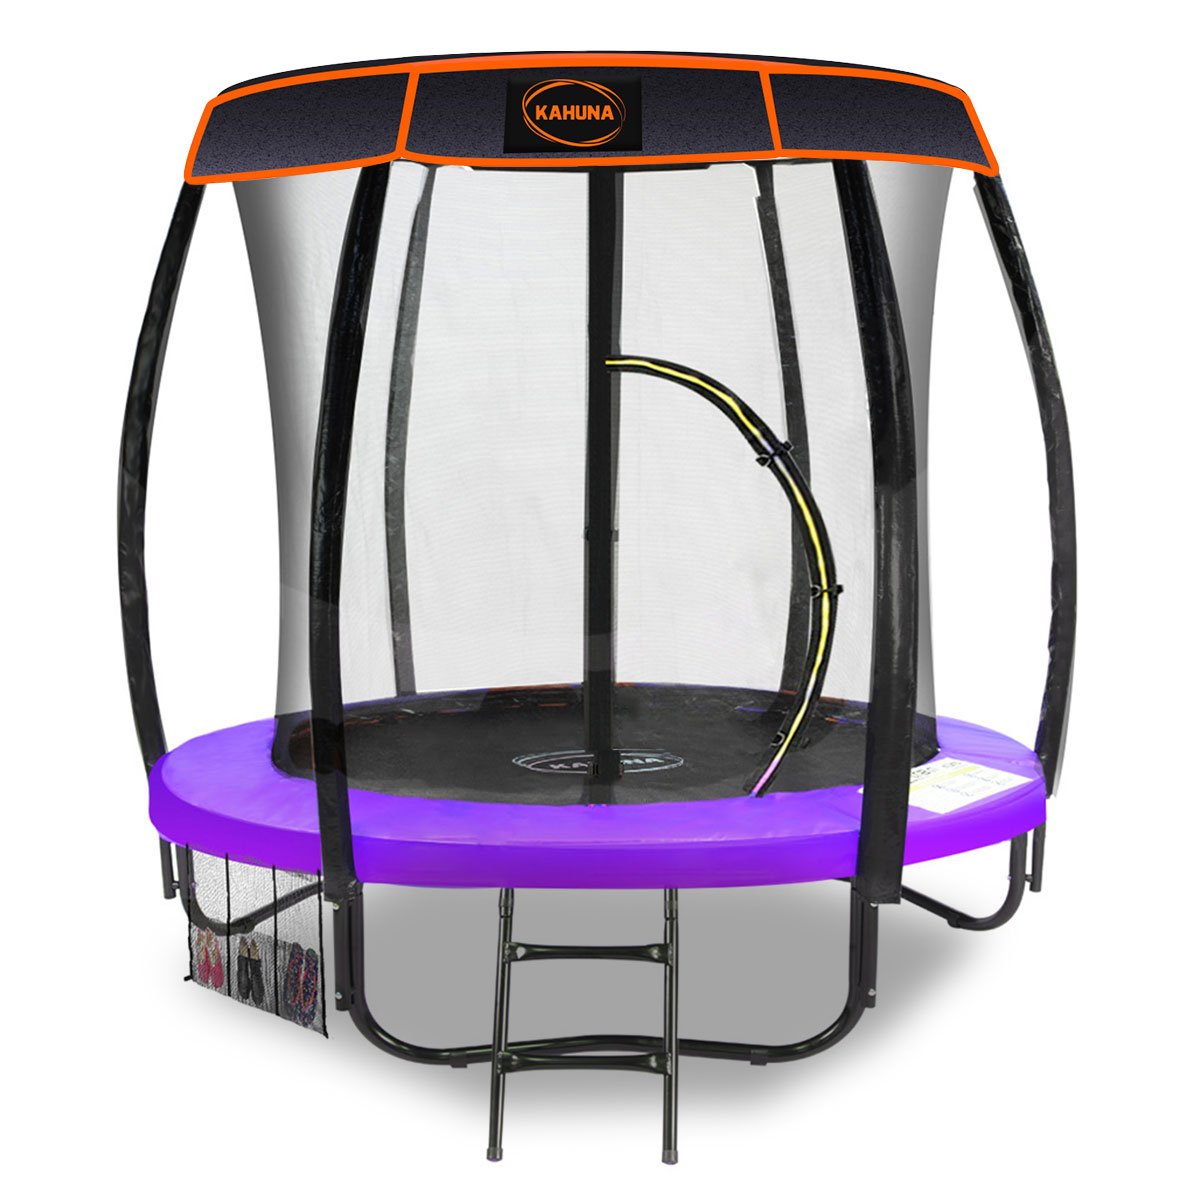 trampolines Trampoline 6ft with  Roof Cover - Purple